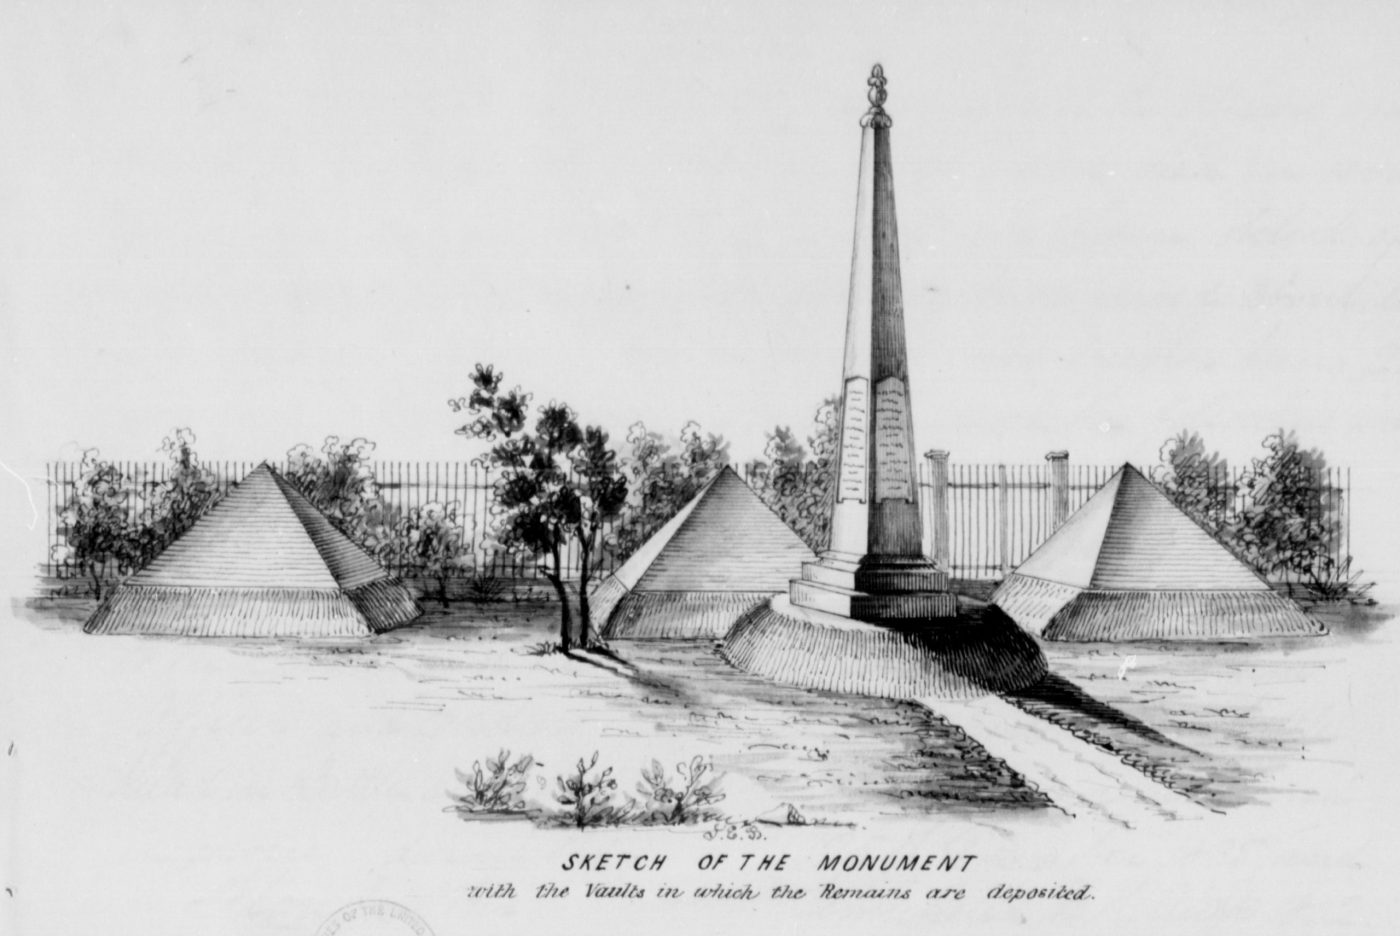 Sketch of the Dade Pyramids and Monument in St. Augustine, Florida, from 1844 U.S. Army report. At the end of the Second Seminole War (1835-42), the Army interred the remains of an estimated 165 U.S. soldiers who died in the conflict in vaults beneath the pyramids. (National Archives)